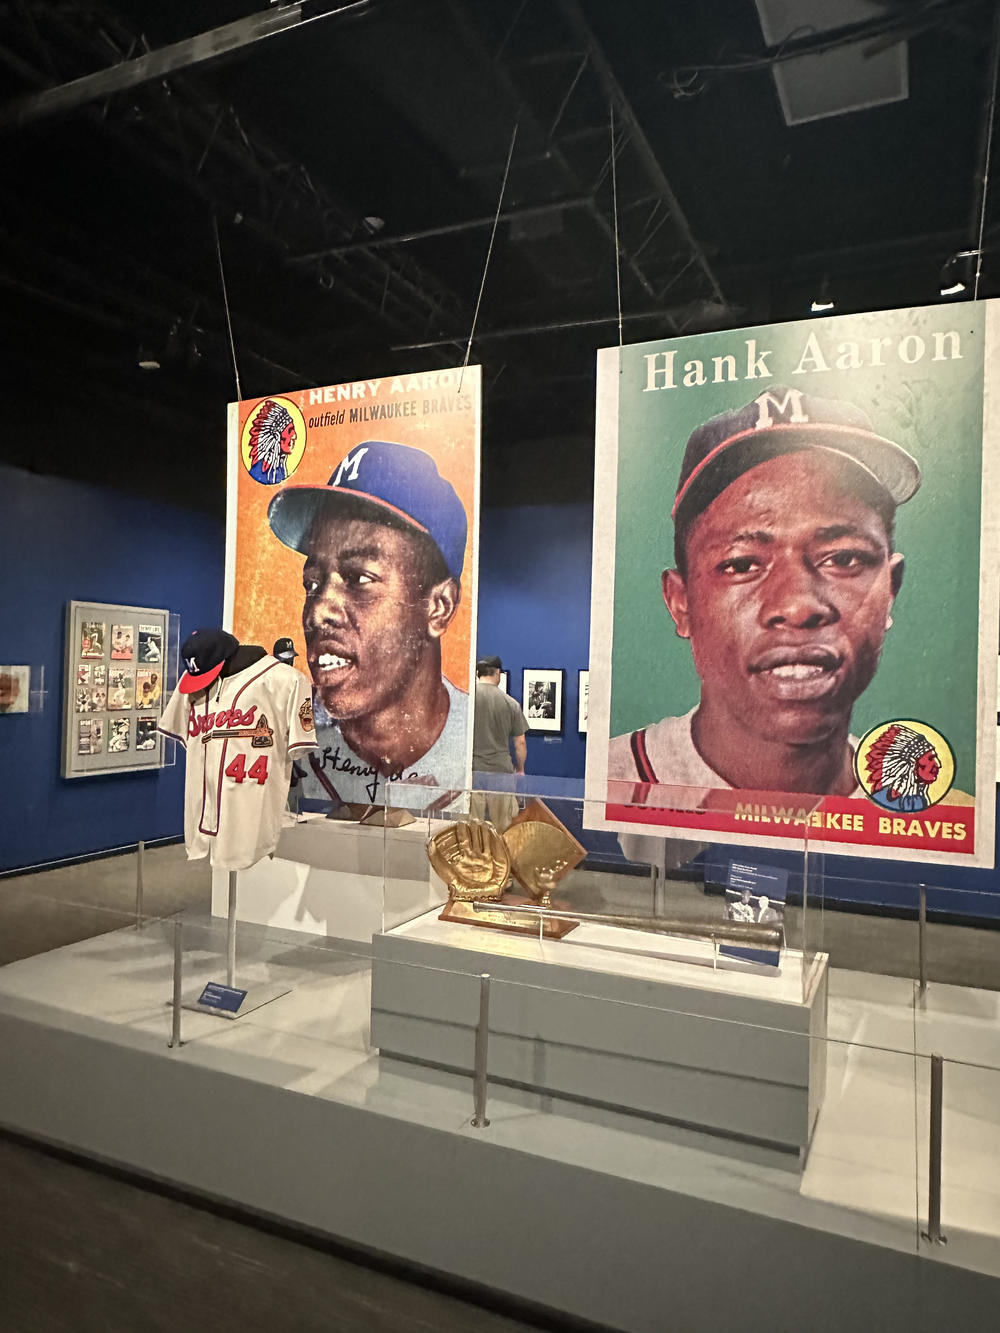 A case displays memorabilia from Hank Aaron's stint with the Milwaukee Braves at the Atlanta History Center's "More Than Brave" exhibit.